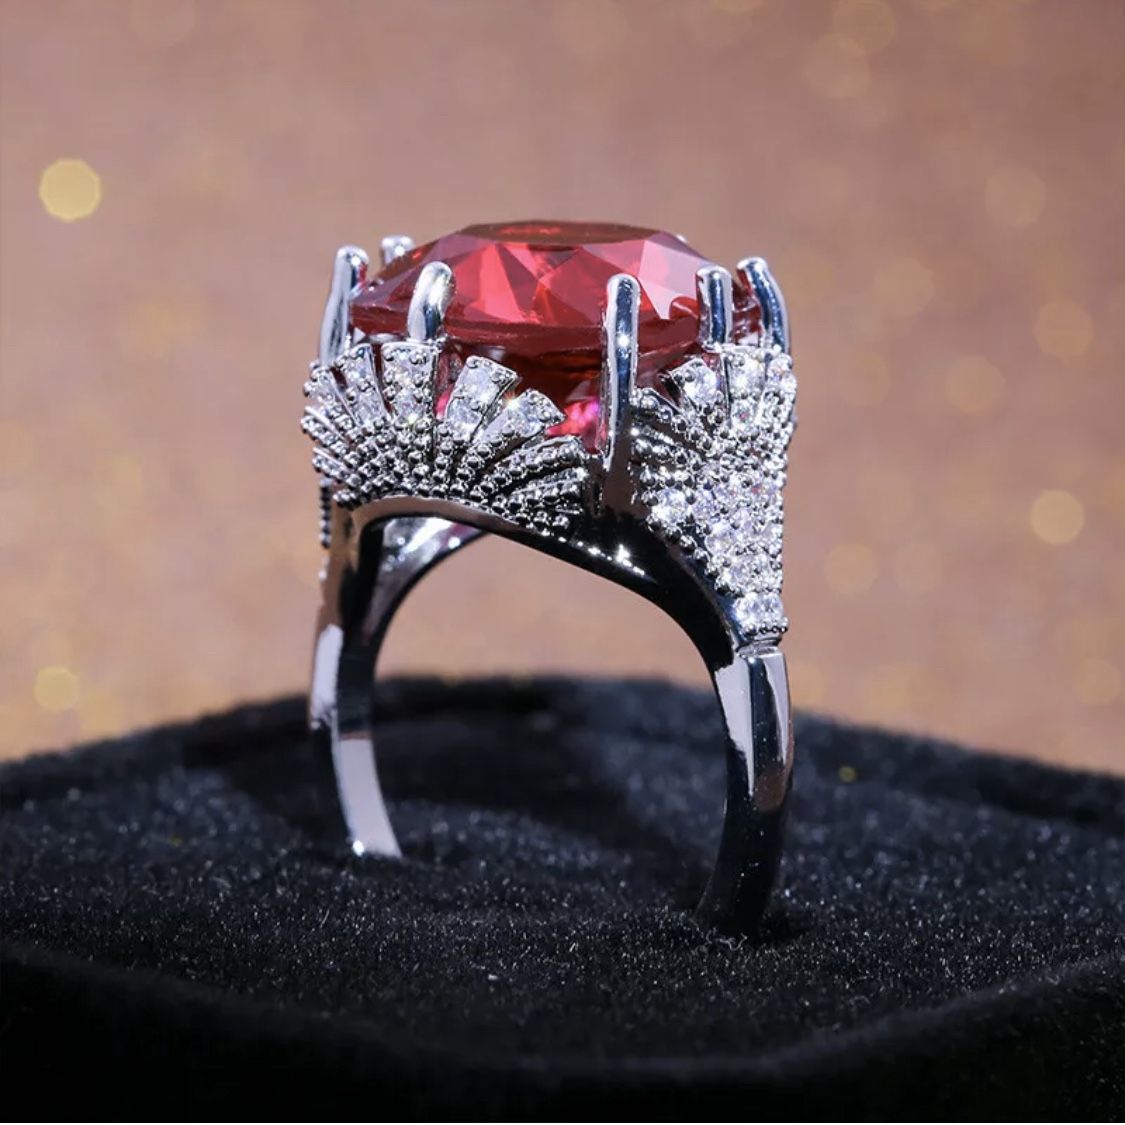 Luxury Women 925 Silver Jewelry Round Cut Ruby Wedding Engagement Ring Size 7